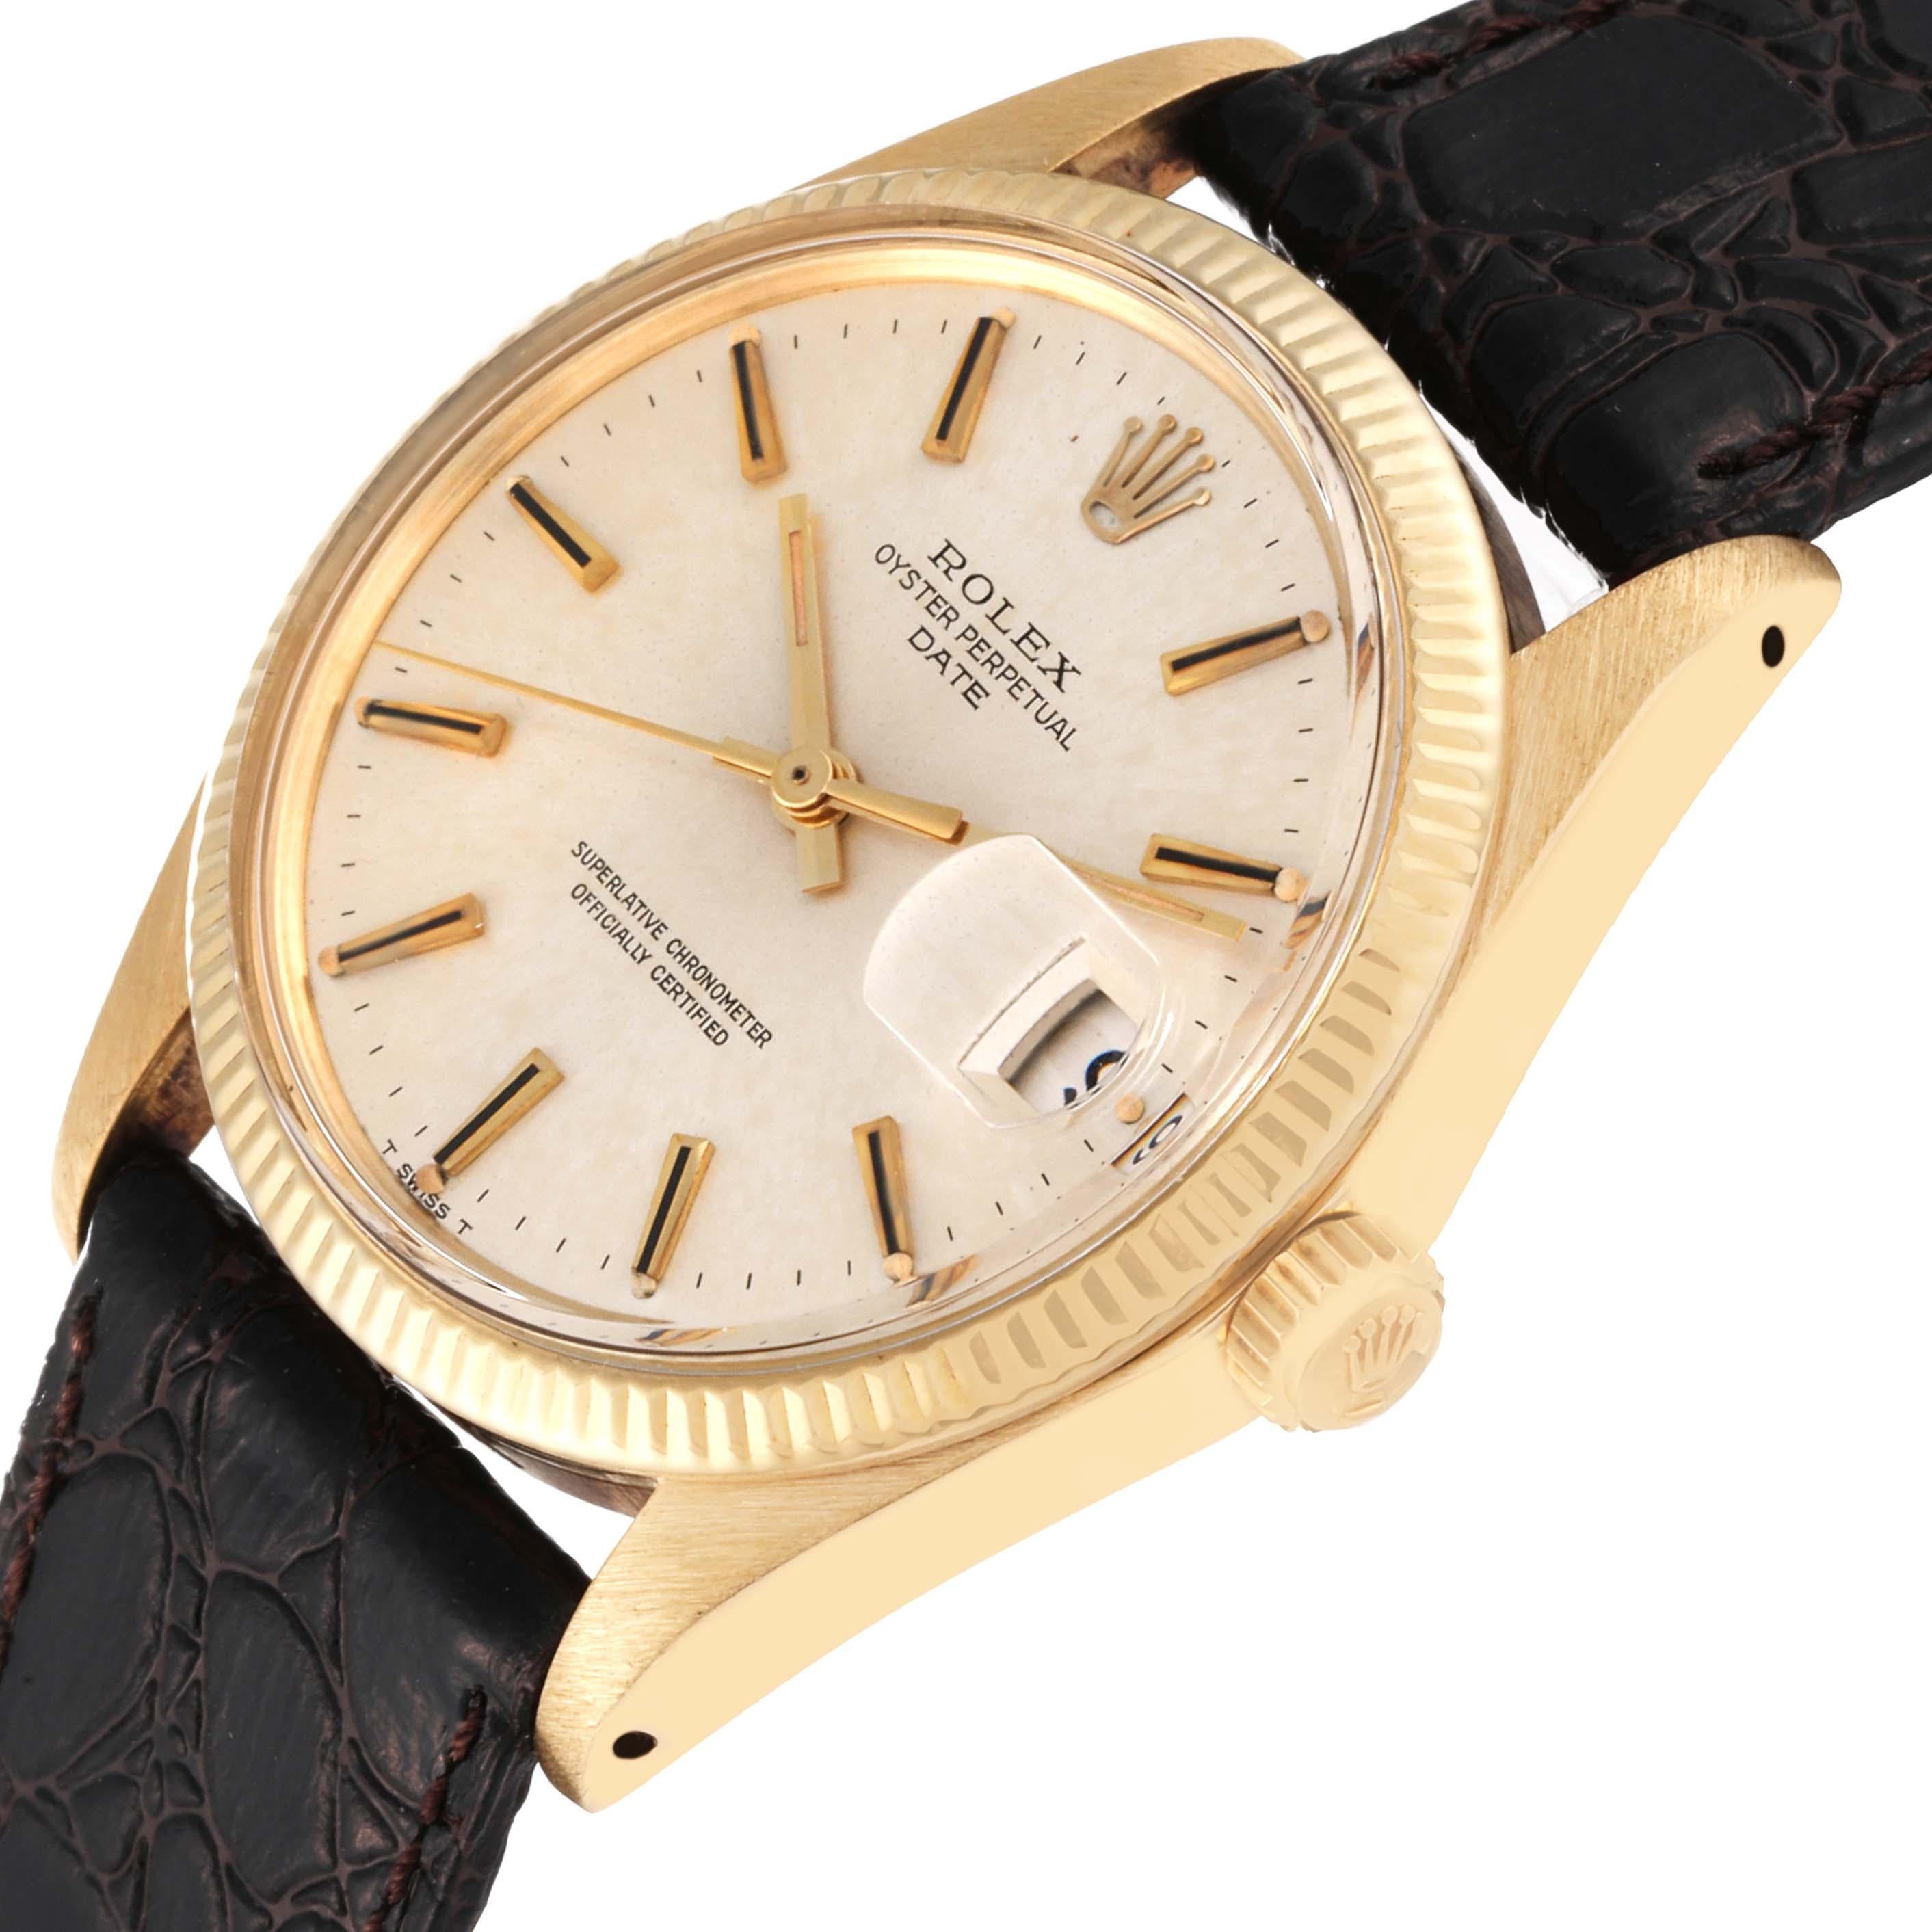 Rolex Date Yellow Gold Champagne Dial Vintage Mens Watch 1503 Box Papers 1